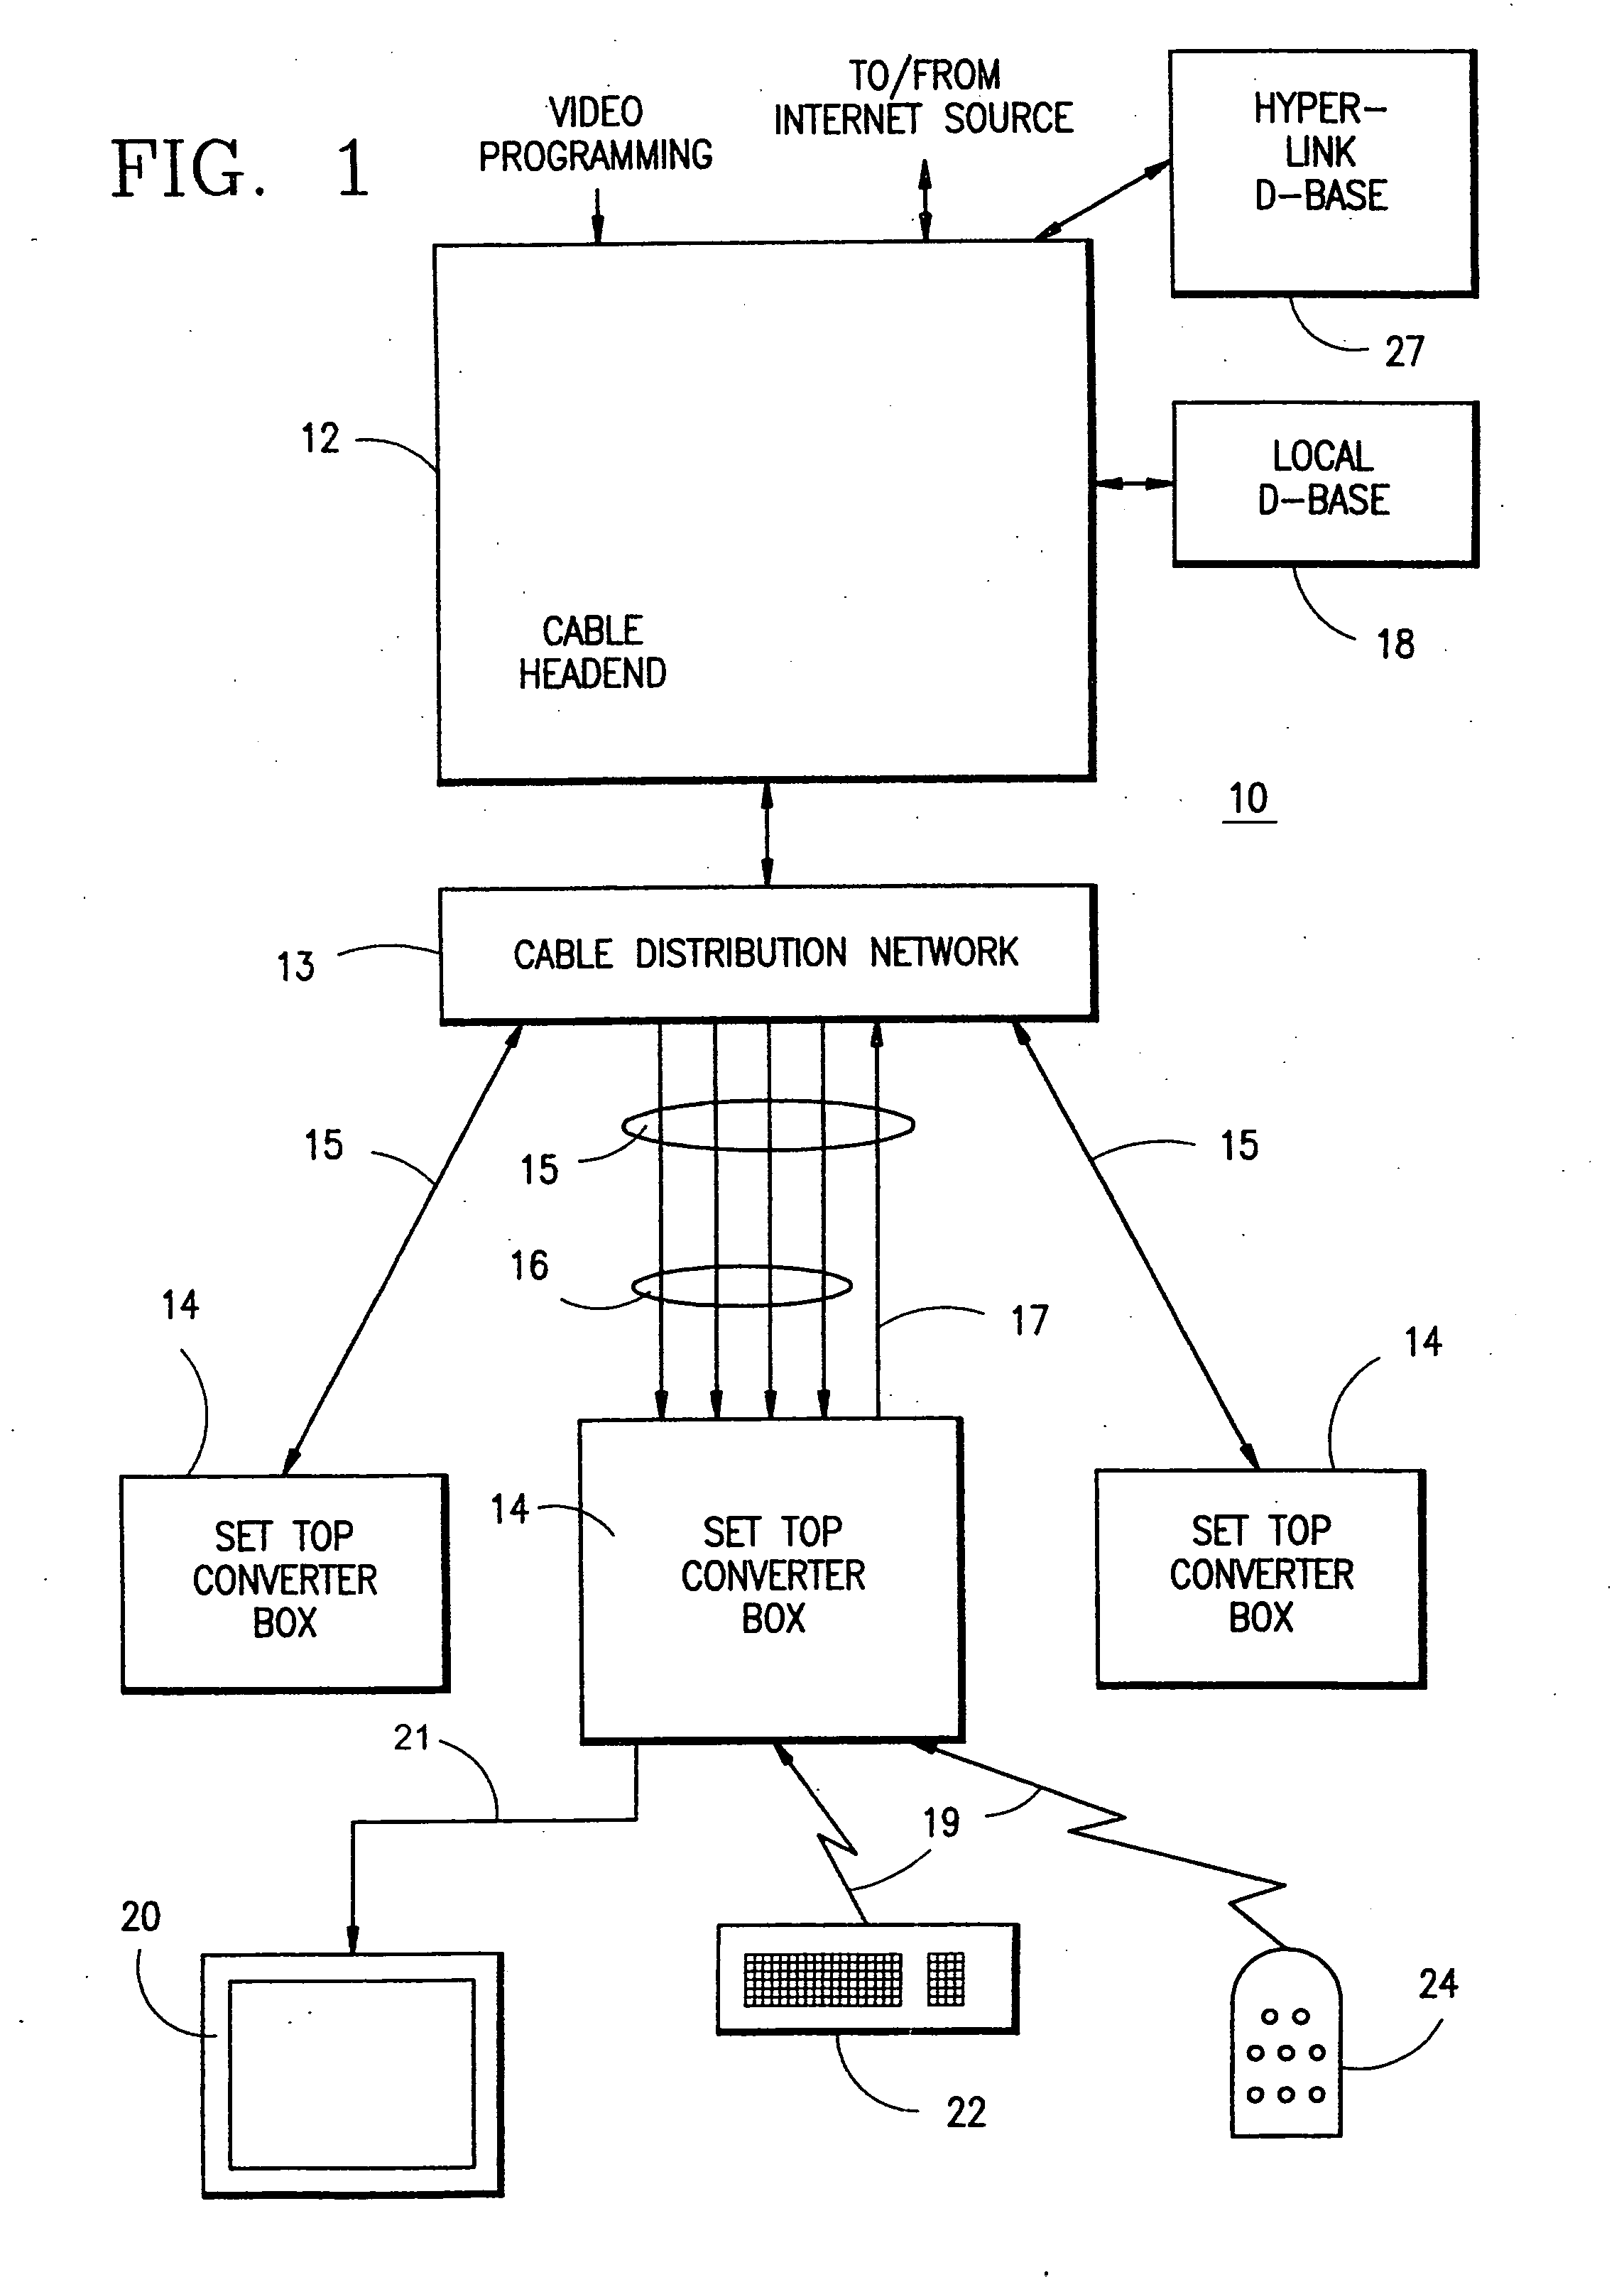 System and method for broadcasting web pages and other information